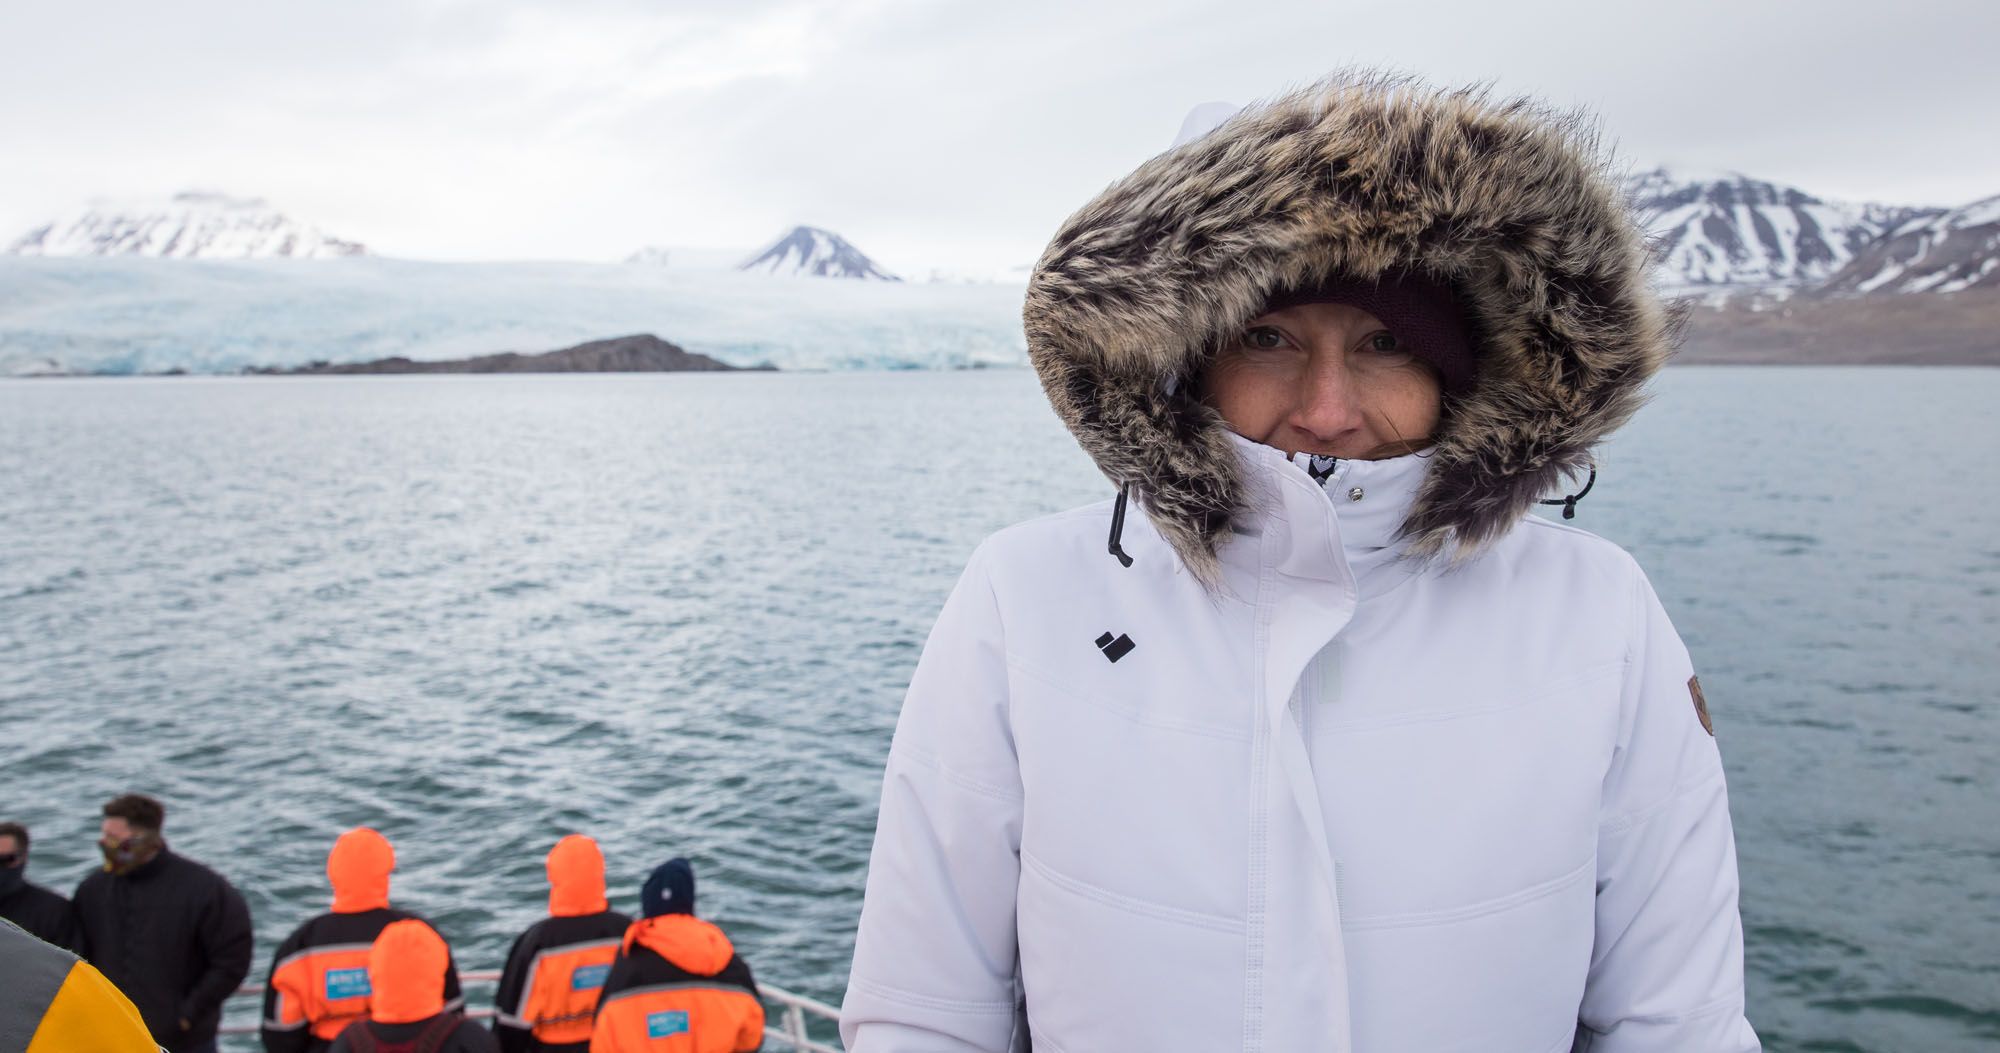 Featured image for “Svalbard Packing List: What to Pack for the Summer Months”